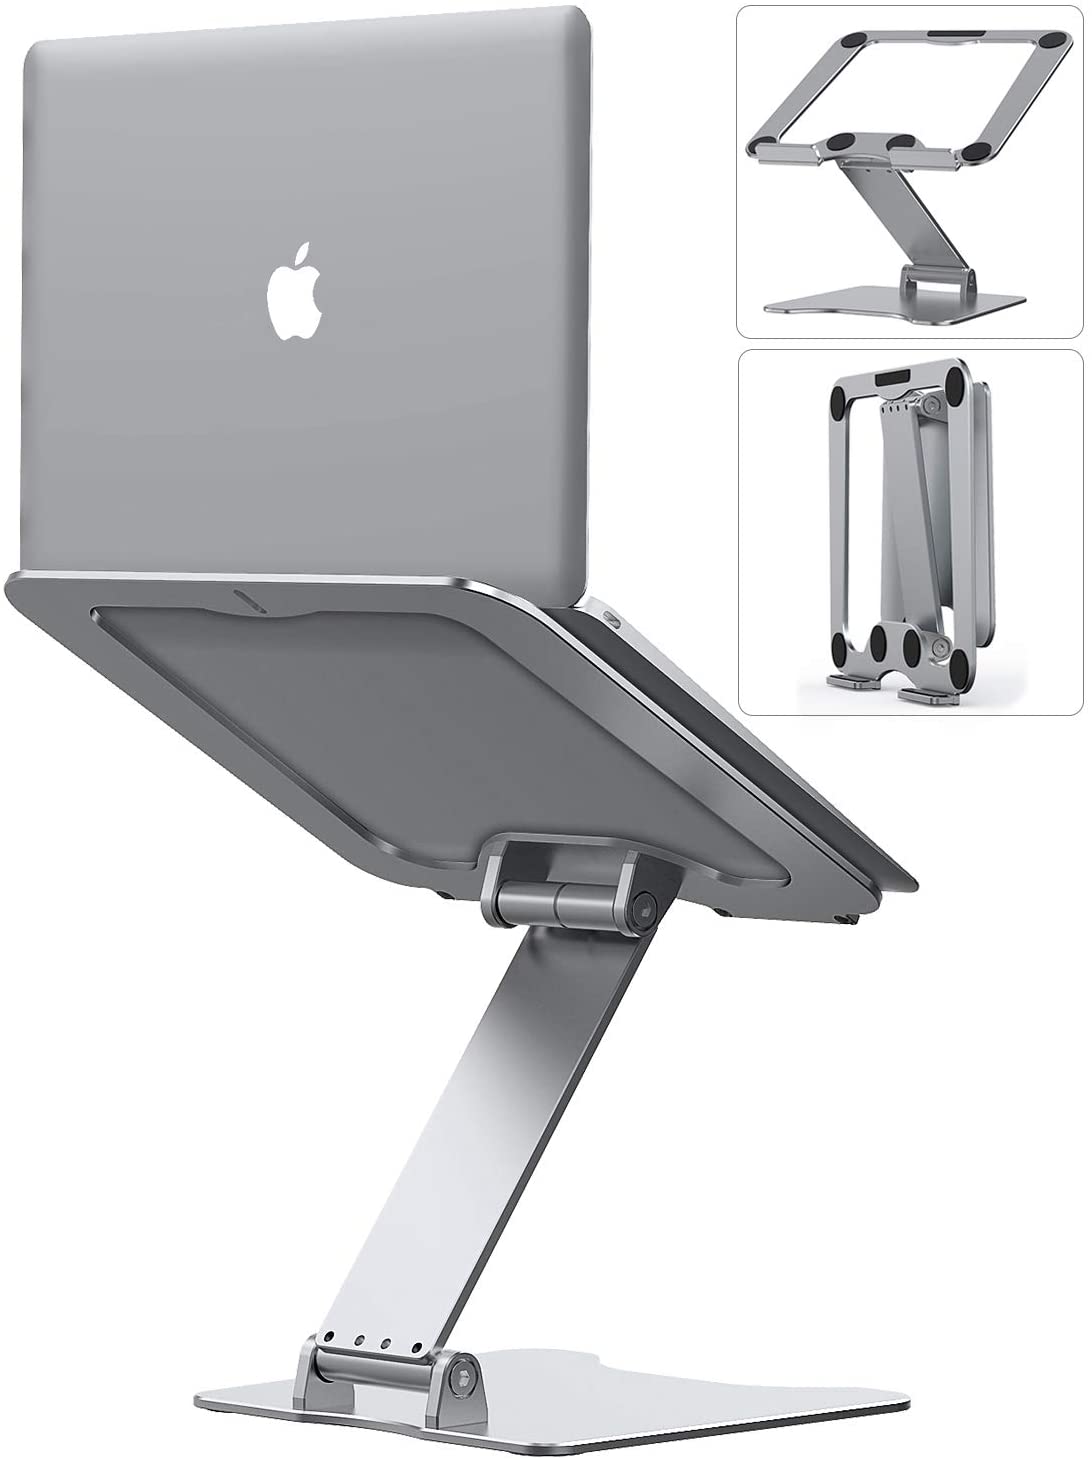 Laptop riser or stand constructed with Aluminum and Adjustable.